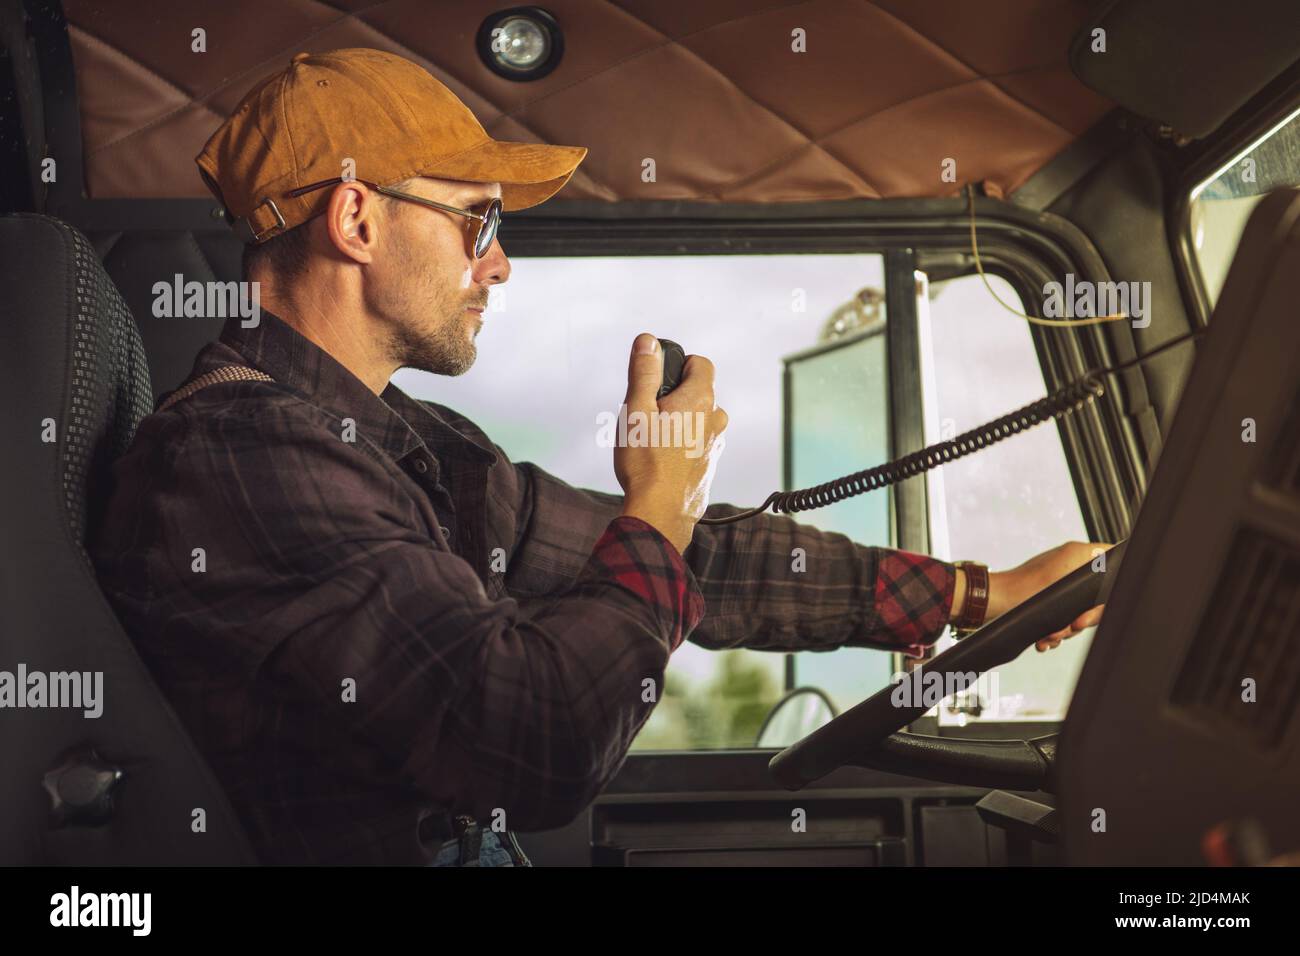 Closeup of Professional Truck Driver Communicating Through His CB Radio While Completing a Cargo Delivery. Useful Trucker Tools. Stock Photo